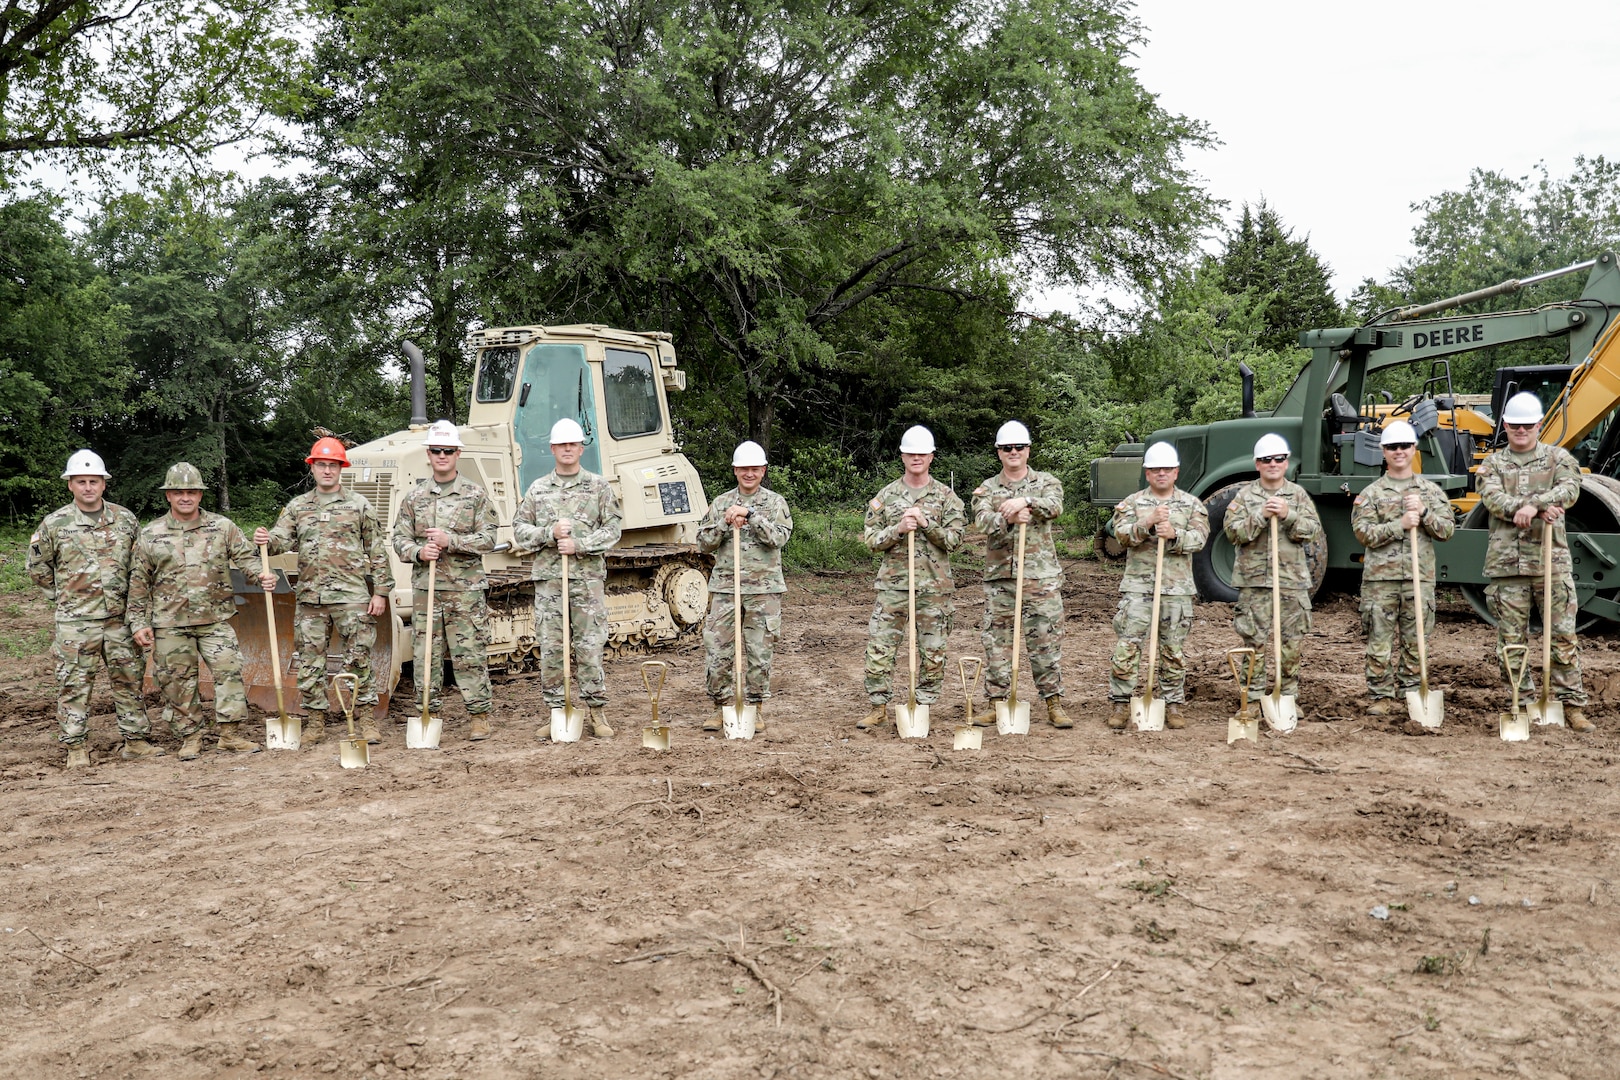 Leaders from the Oklahoma National Guard pose for a photo before breaking ground on the Oklahoma National Guard’s new one-way attack trench warfare lane at Camp Gruber Training Center, Oklahoma on June 2, 2024. After reviewing how the war in Ukraine has developed over the last two years, Oklahoma National Guard leadership elected to construct a trench warfare lane to ensure its Citizen-Soldiers are ready to face large-scale combat operations against near-peer enemies like Russia and China. (Oklahoma National Guard photo by Sgt. Conner McBride)